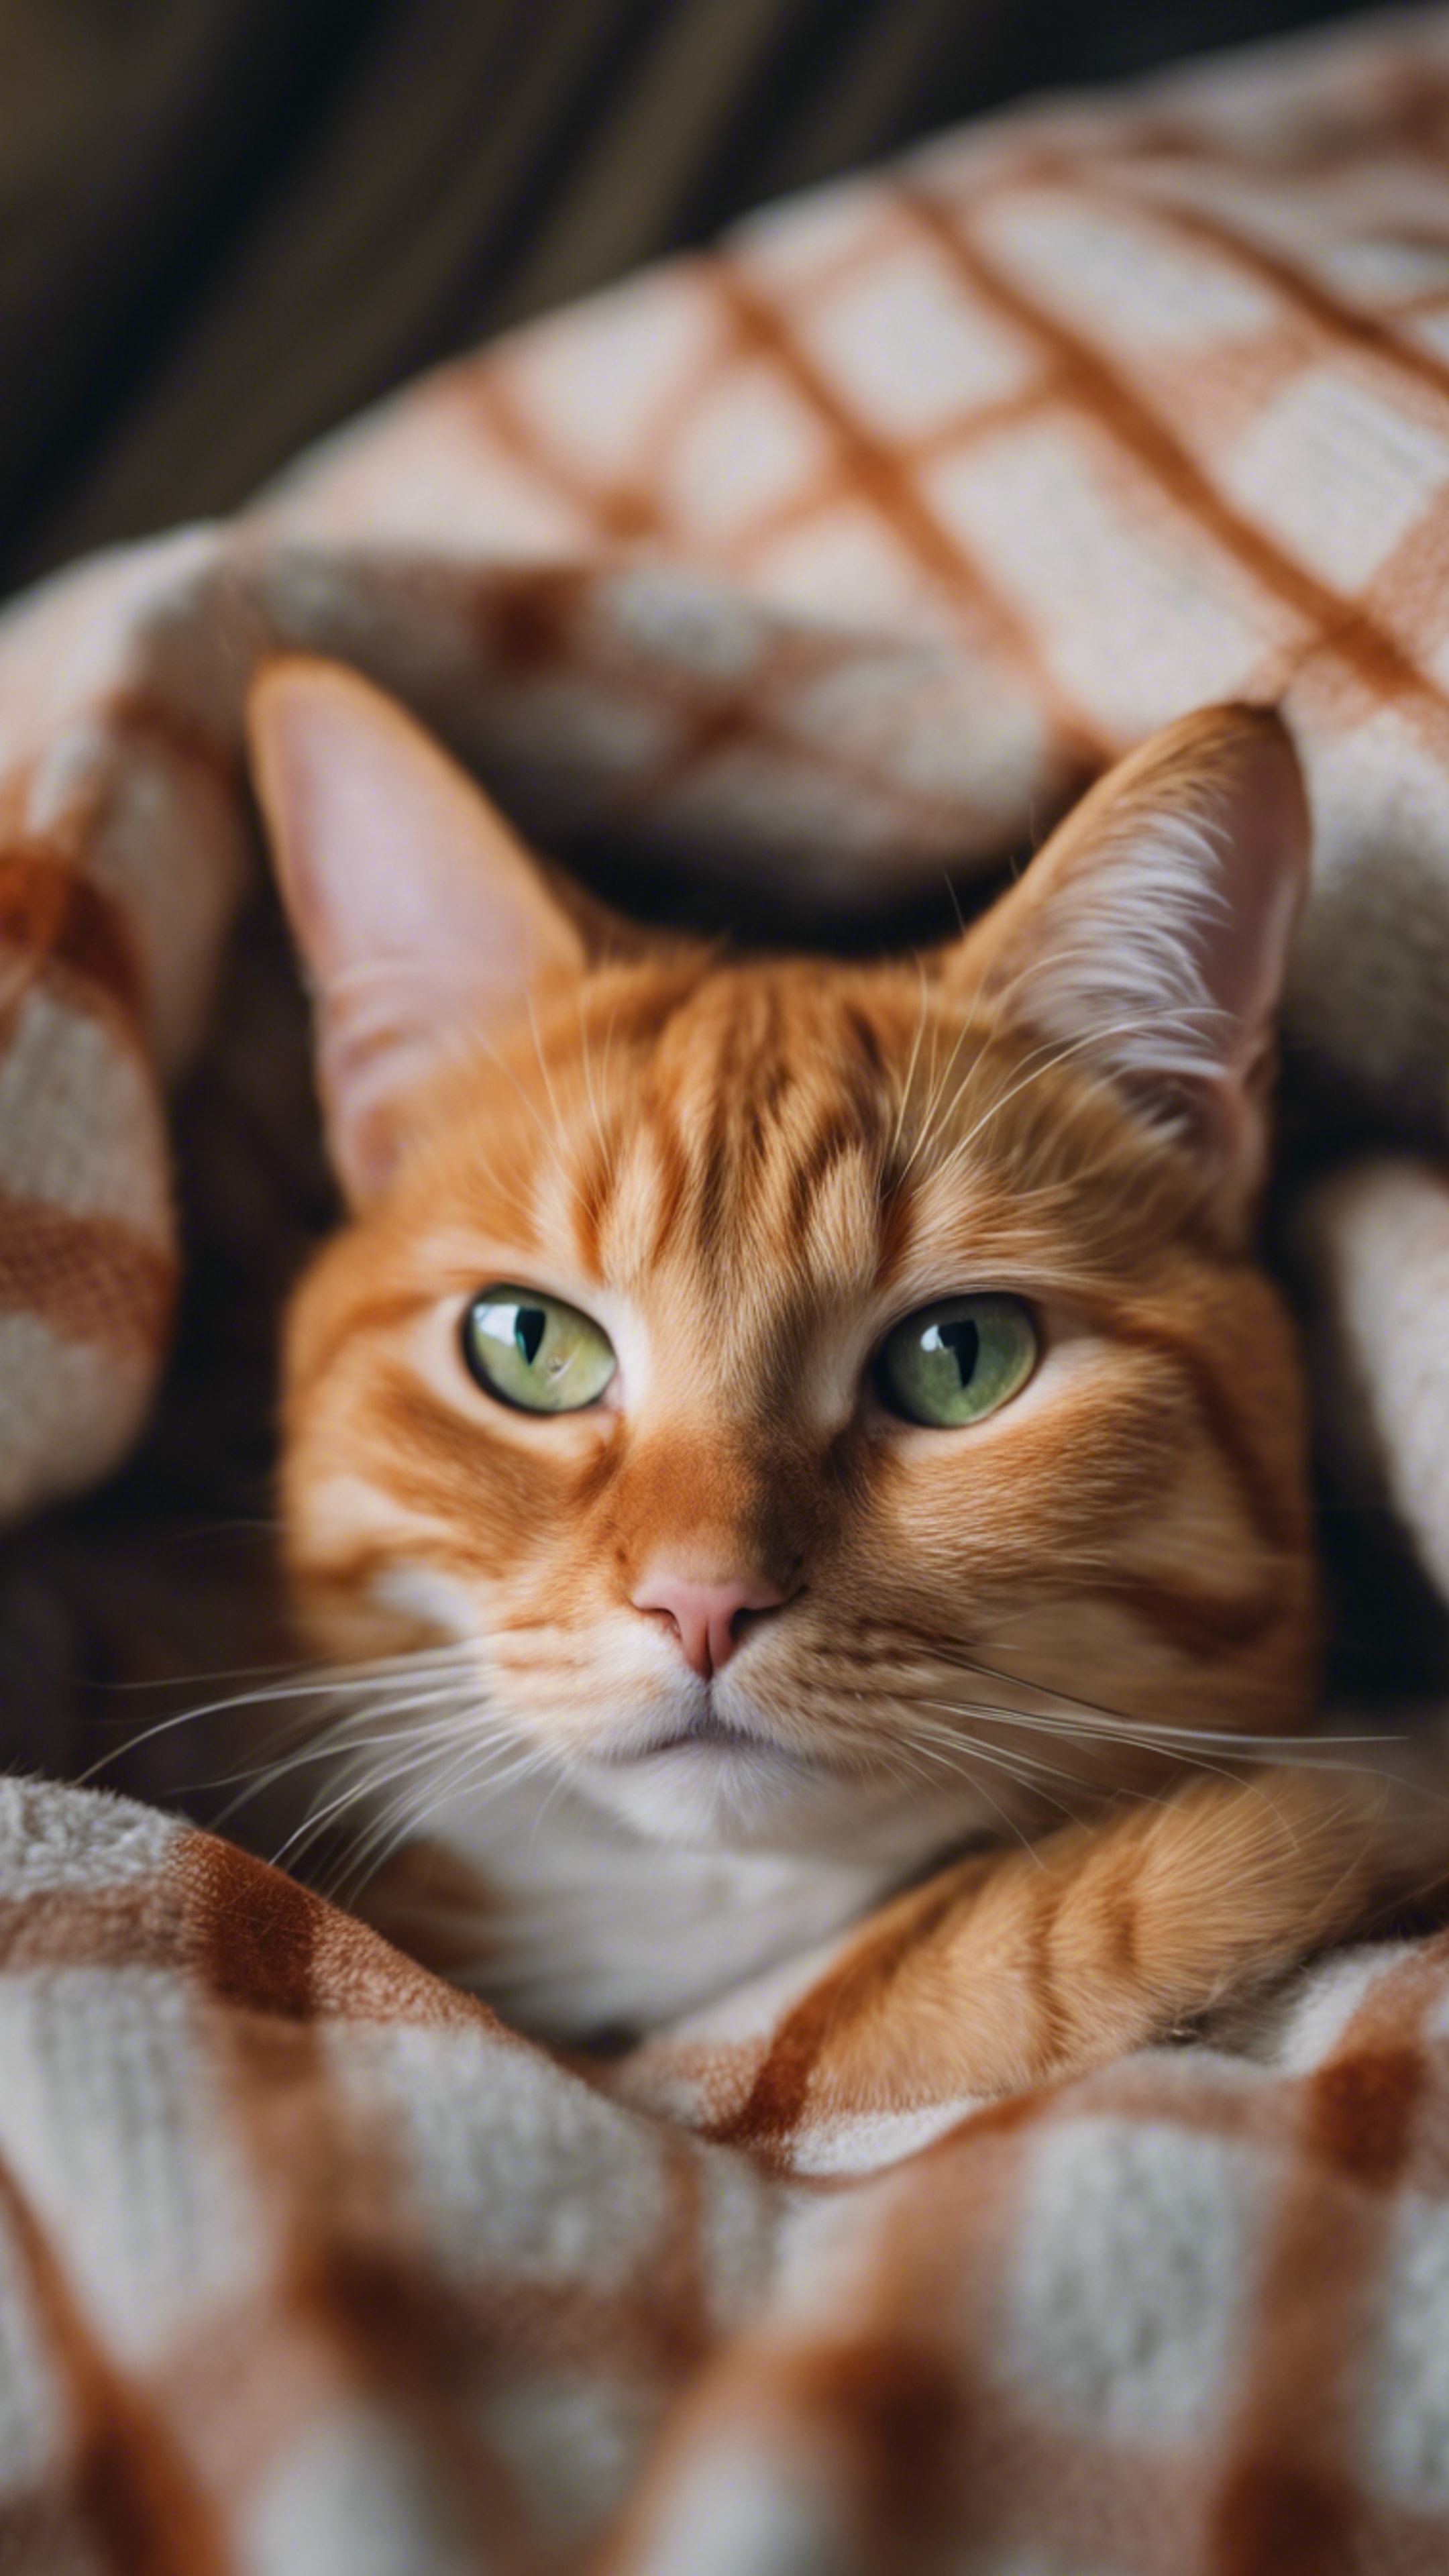 A close up of an orange tabby cat curled up on a cozy plaid blanket, purring gently, with a playful glint in its eyes. Tapet[45e4538616504ff6a891]